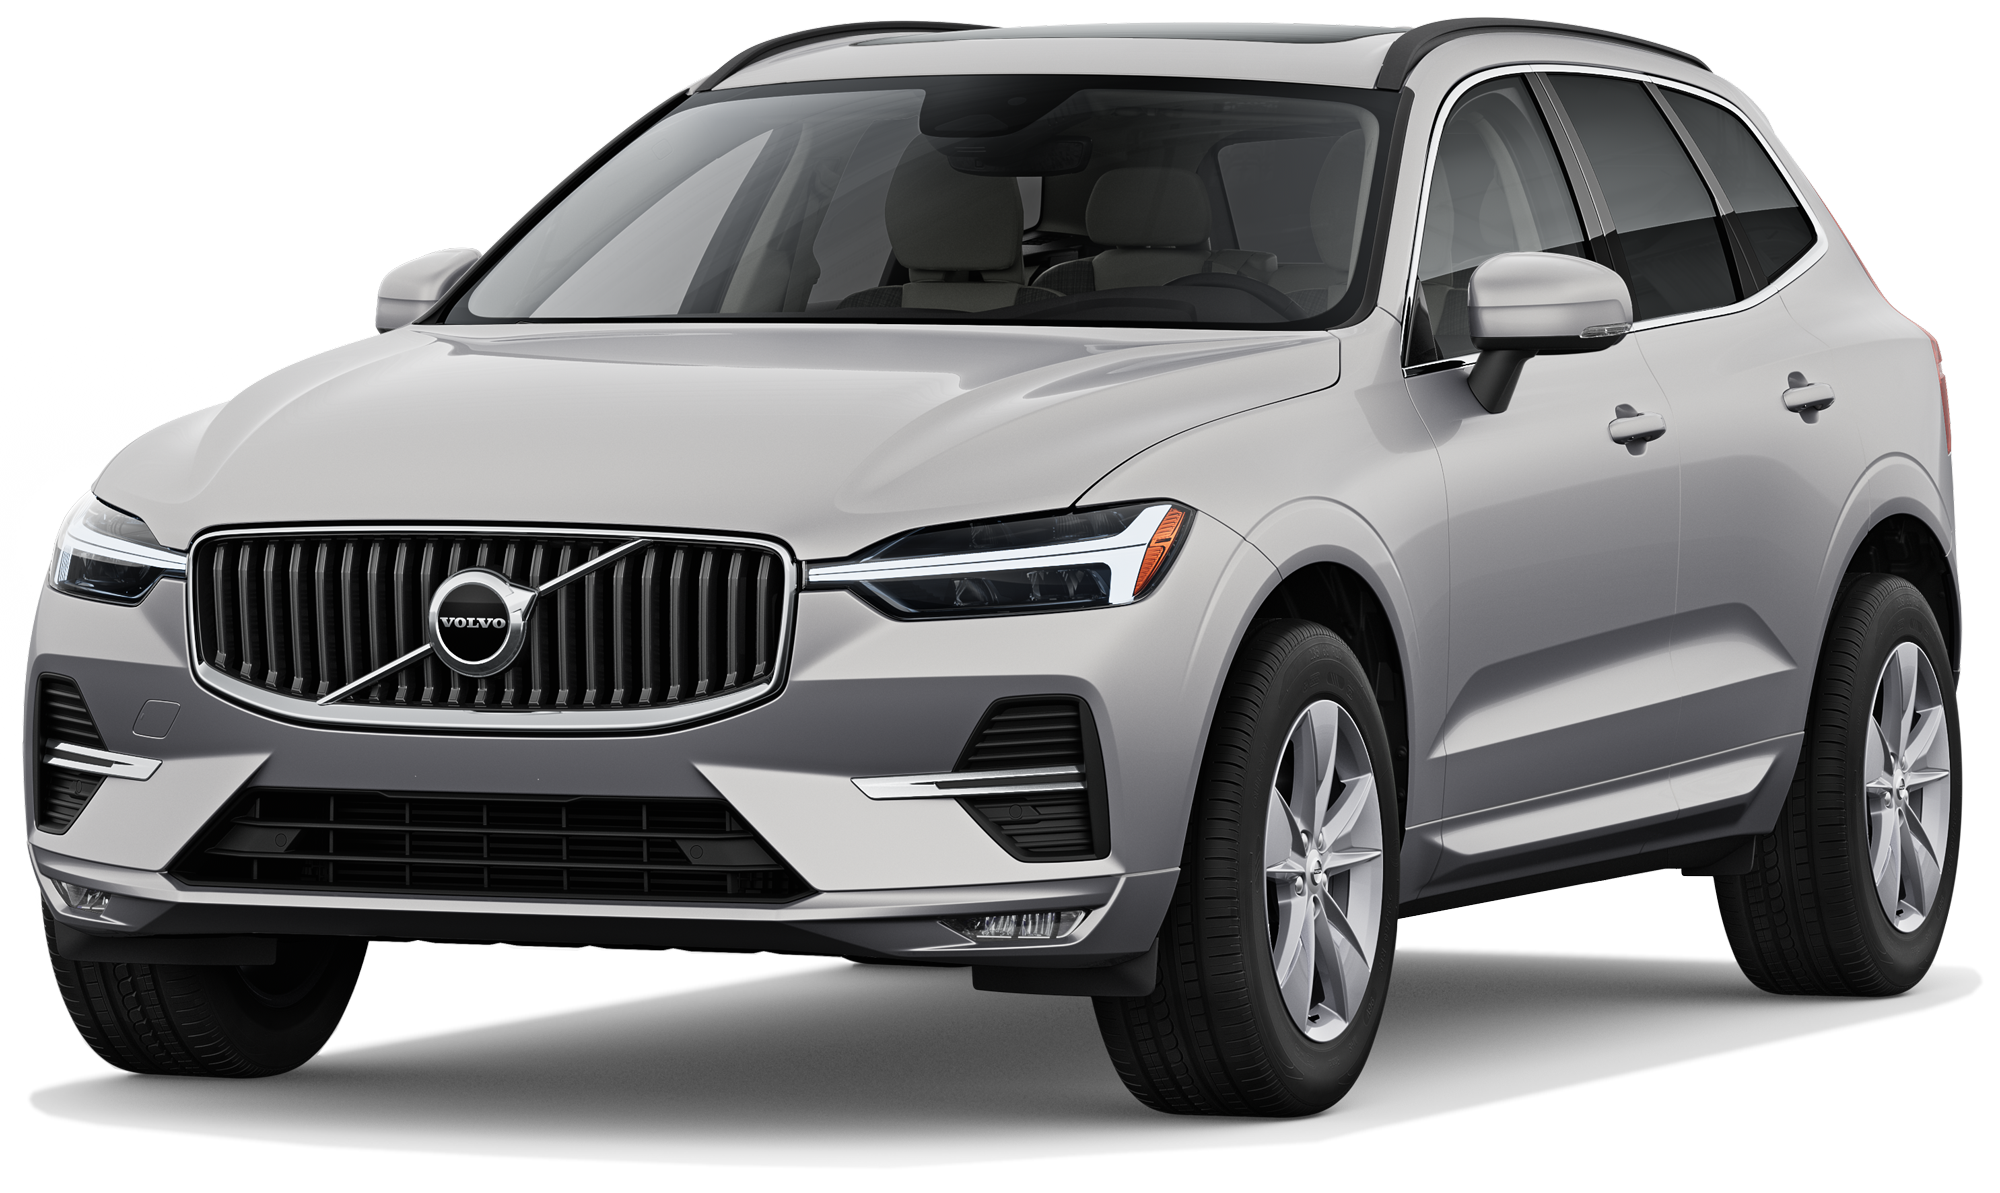 2022 Volvo XC60 Incentives, Specials & Offers in Lisle IL